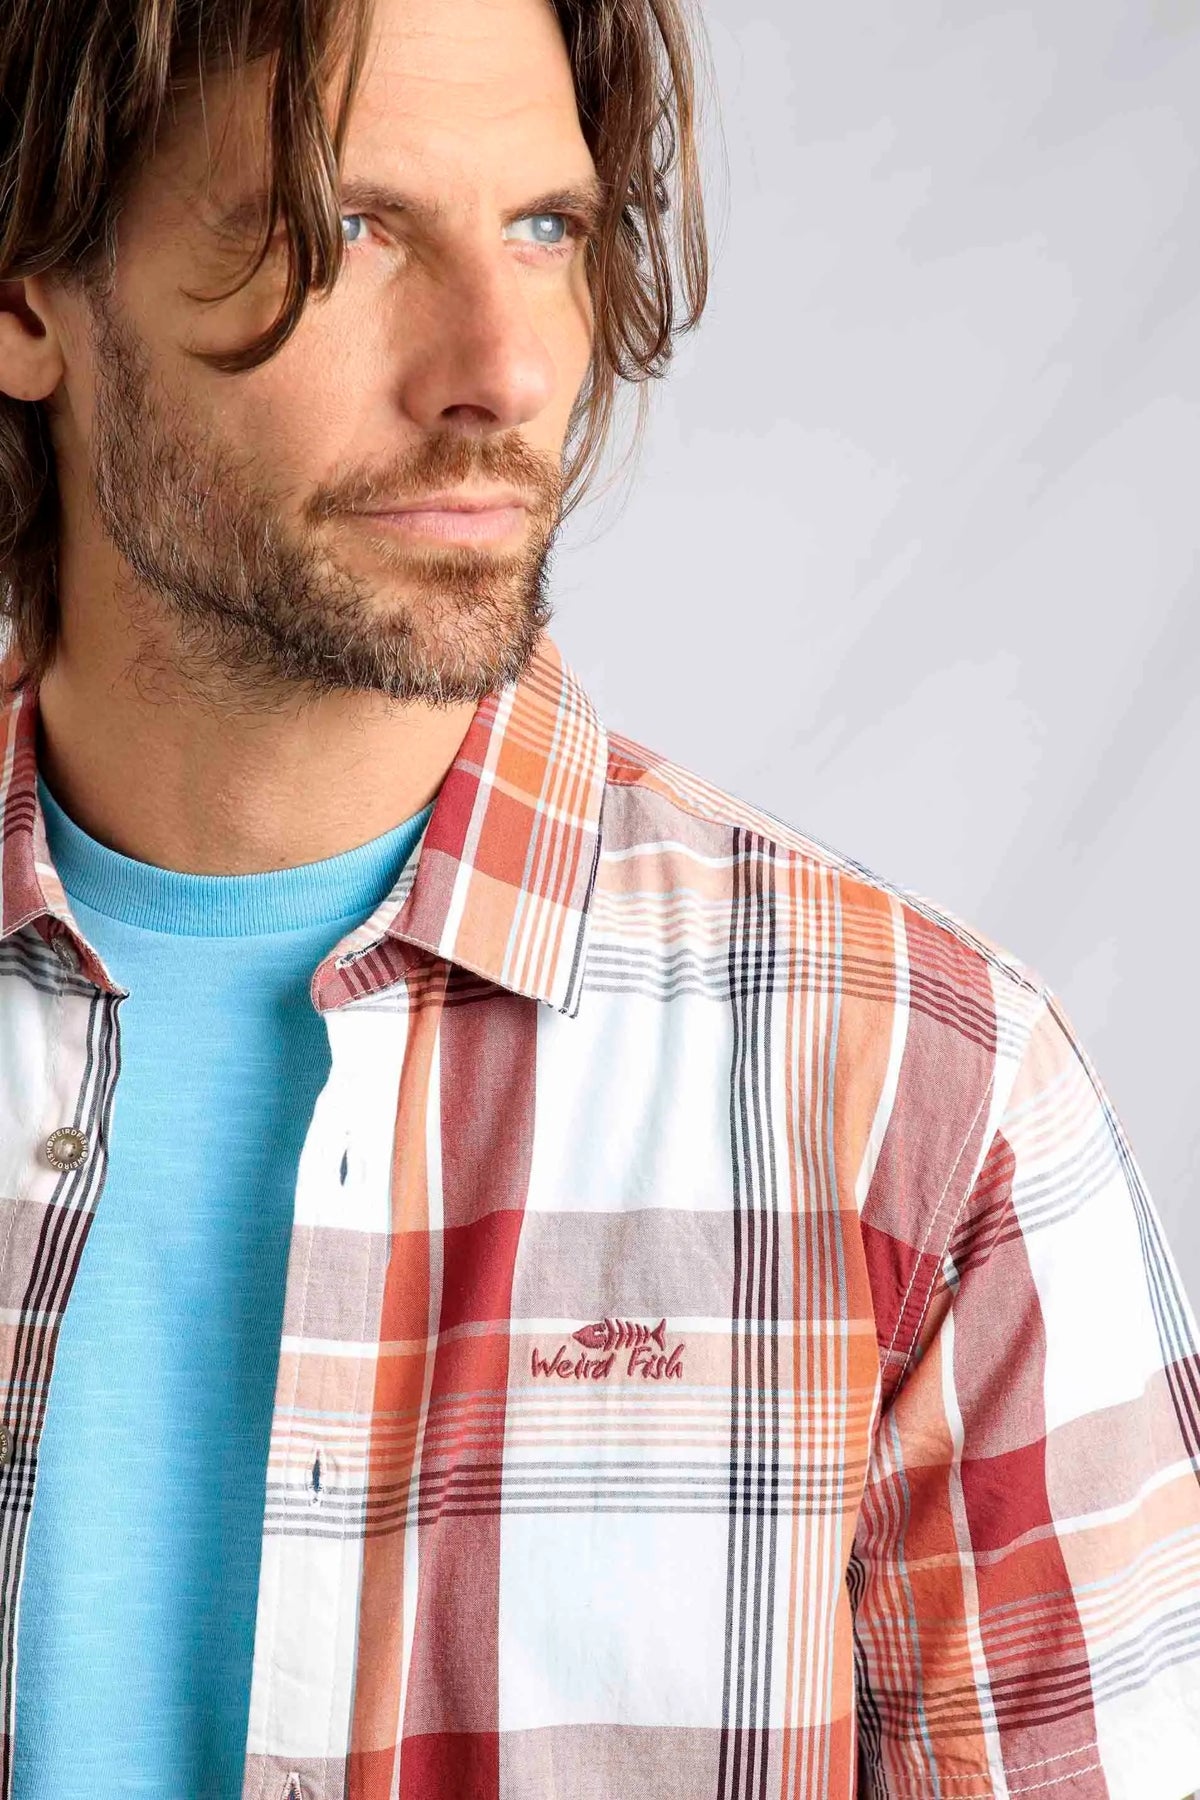 Weird Fish men's Judd short sleeve check shirt in a Chilli Red pattern with embroidered chest logo.